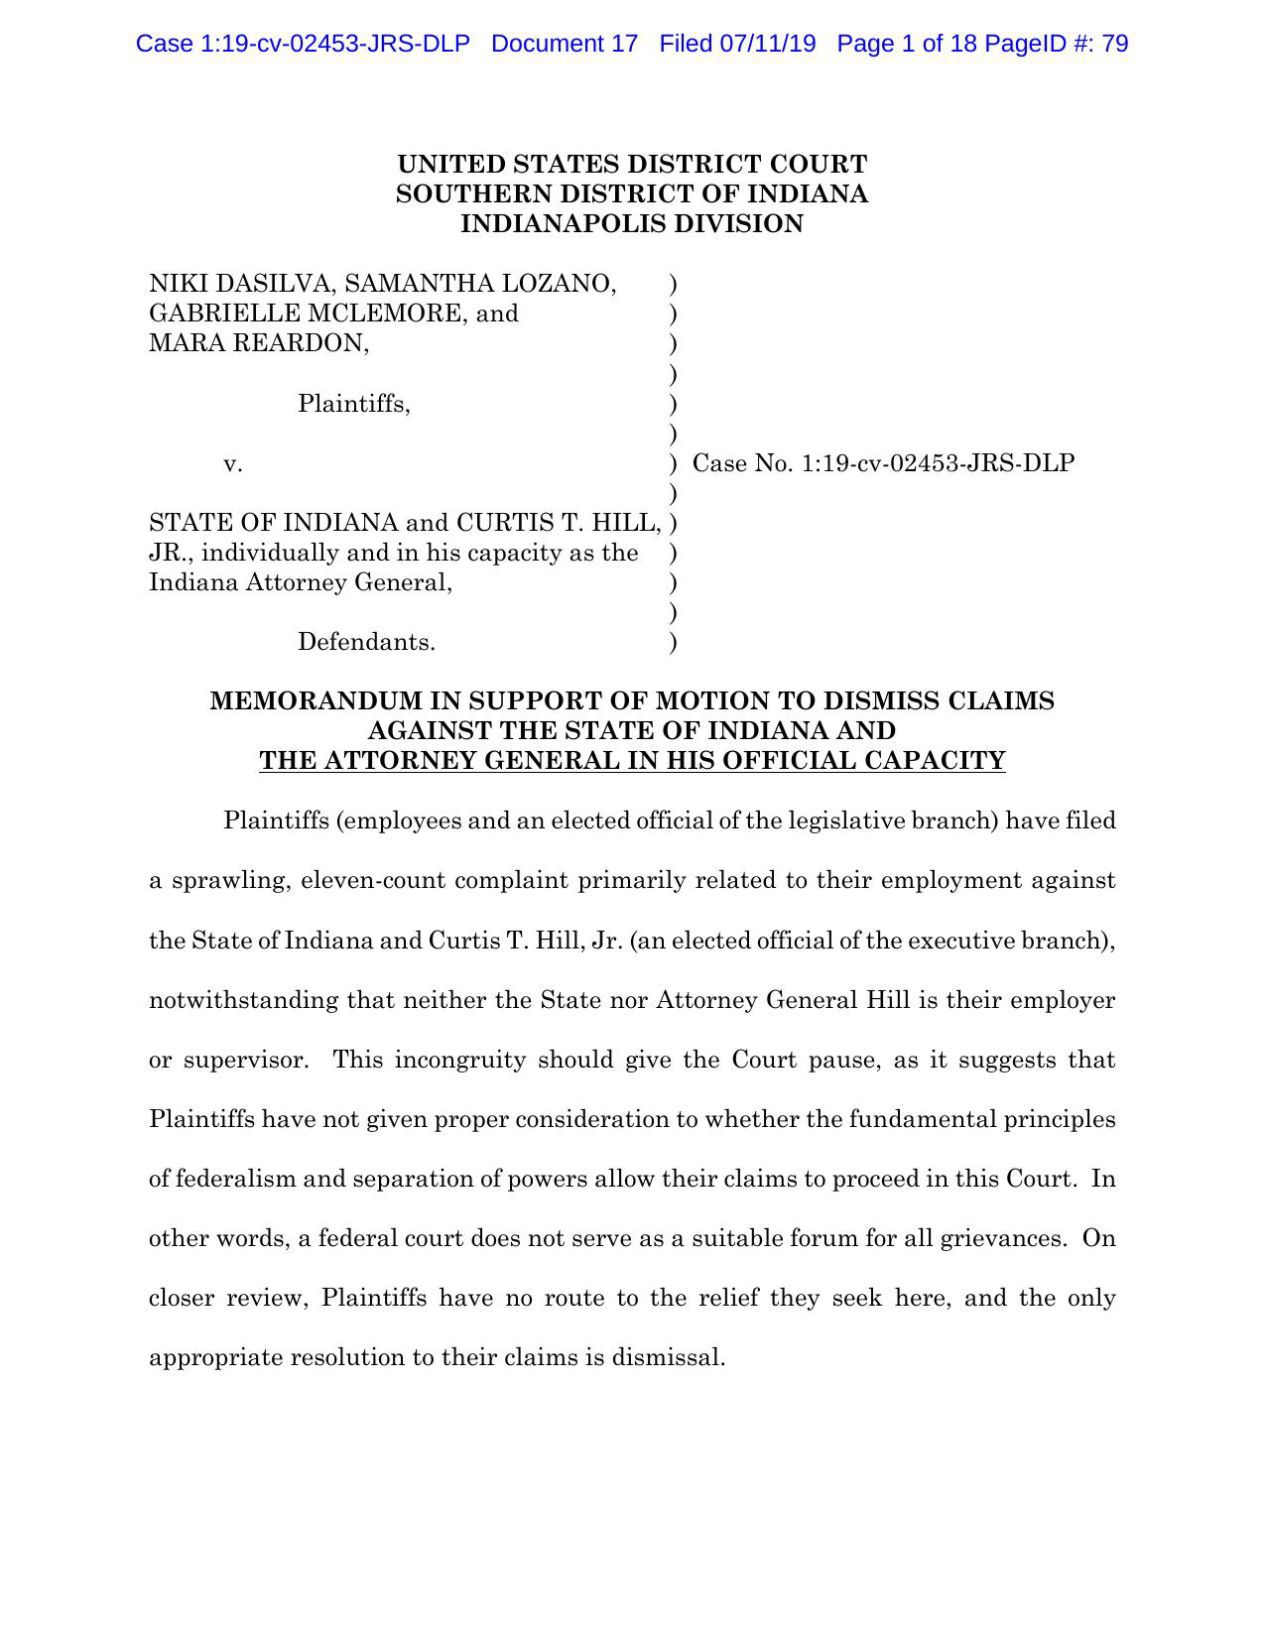 indiana motion to dismiss form